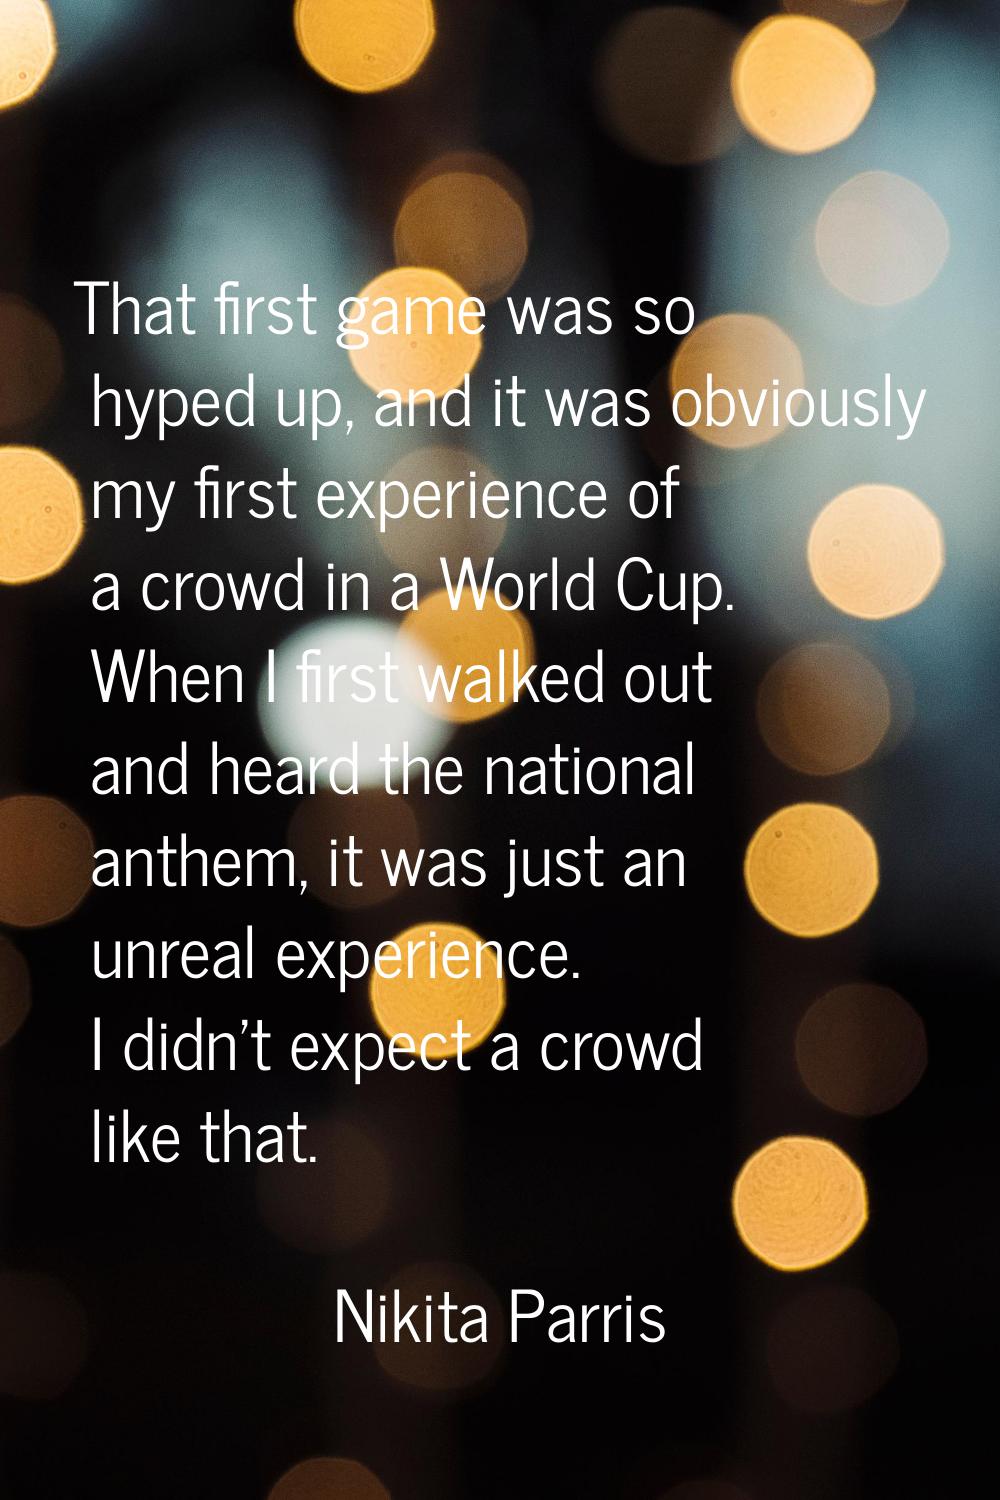 That first game was so hyped up, and it was obviously my first experience of a crowd in a World Cup